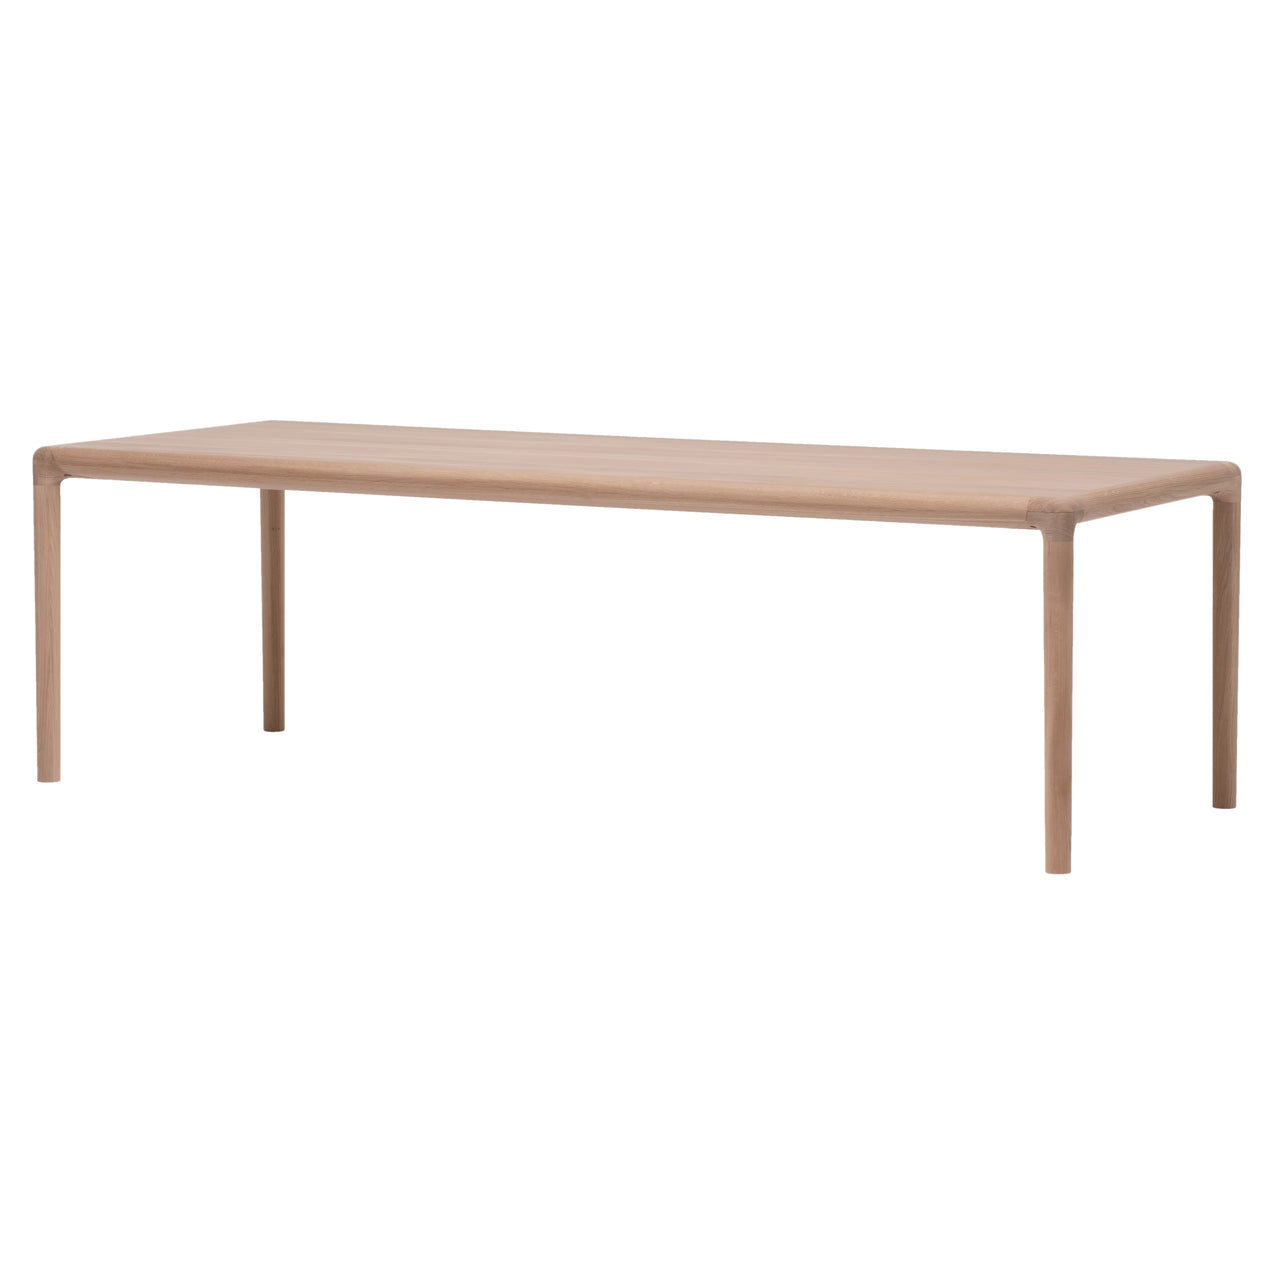 Foster Retreat Dining Table NF-DT01: Large - 94.5